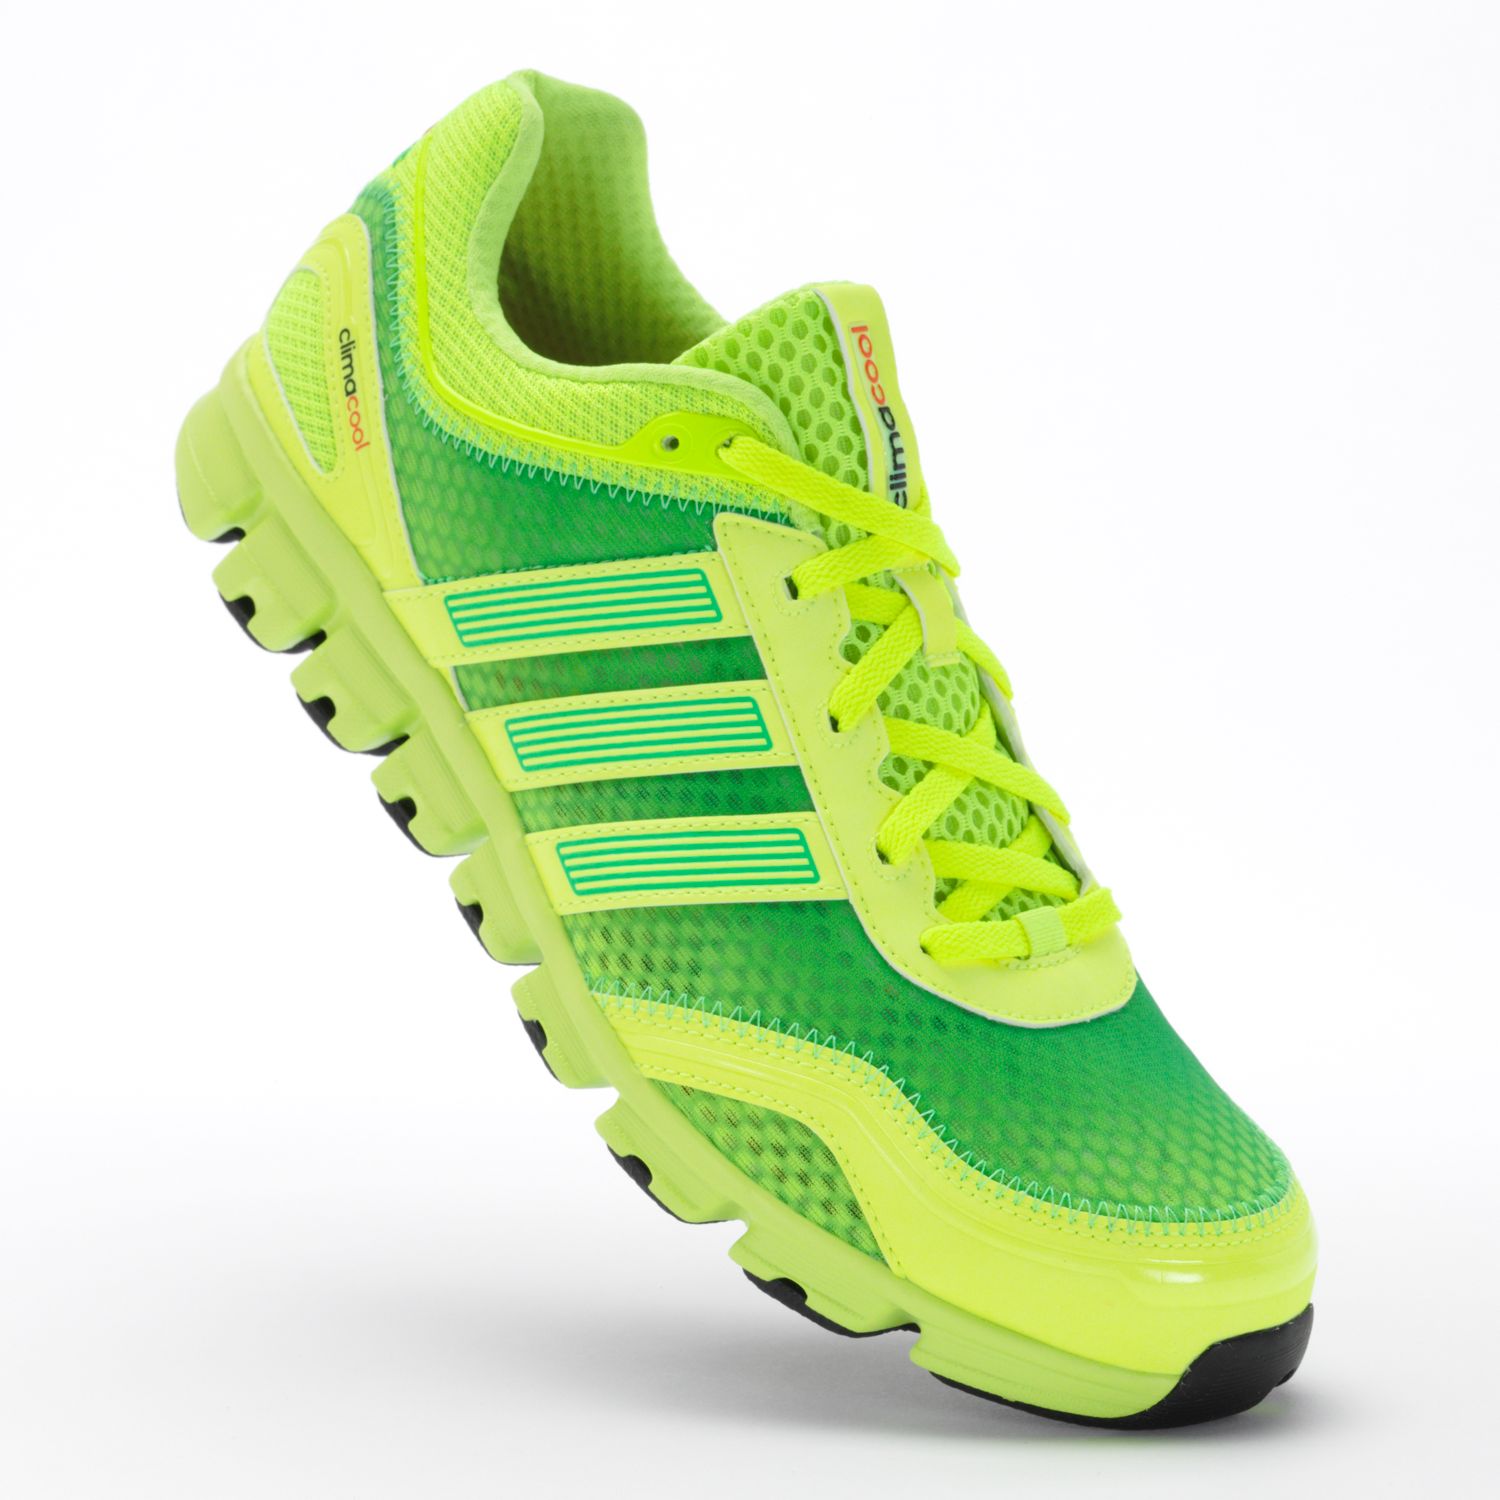 adidas climacool modulate mens running shoes